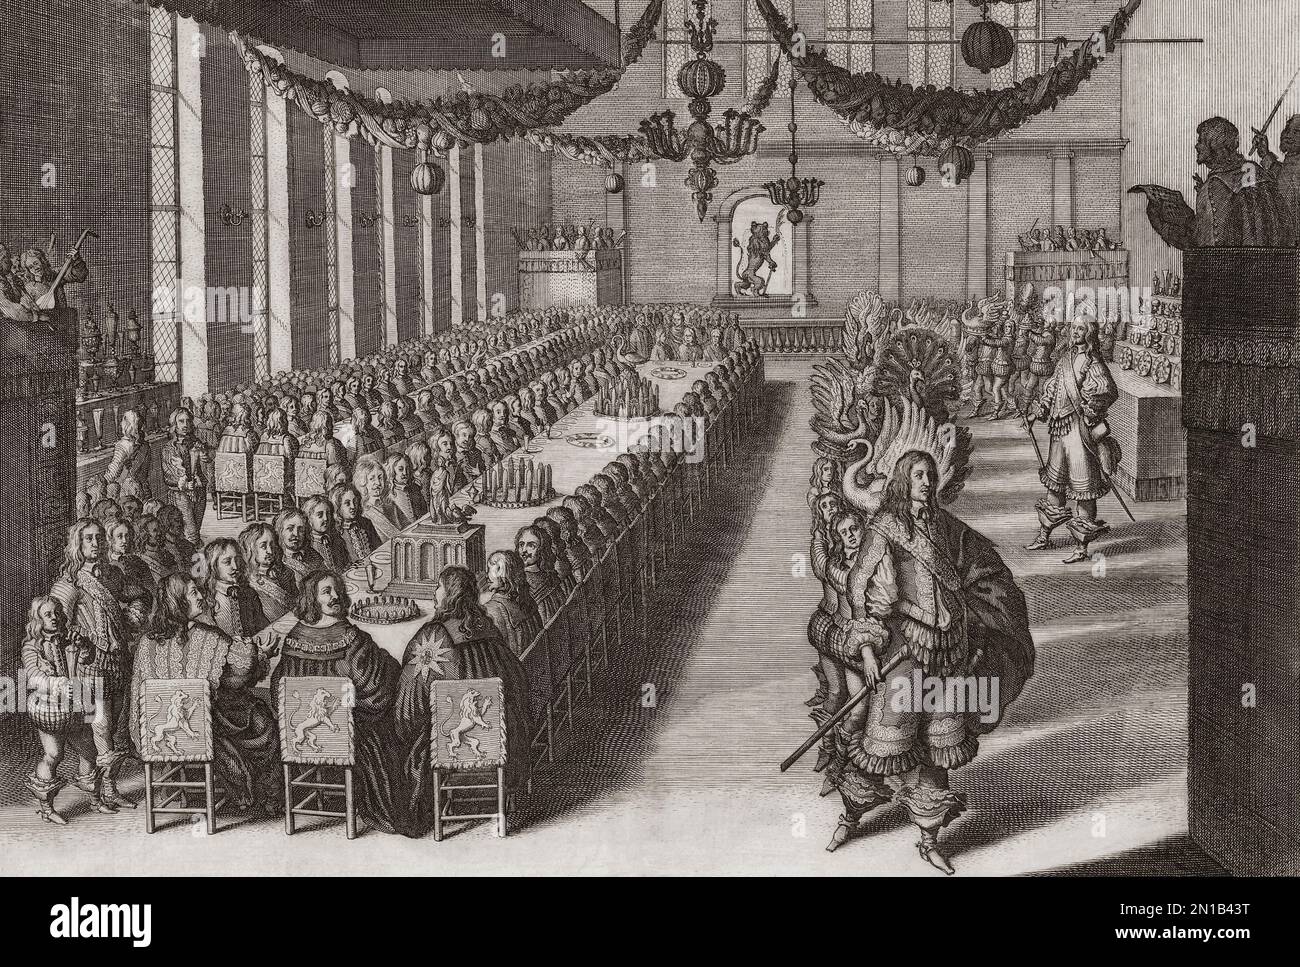 A 17th century banquet.  This official dinner celebrated the signing of the Peace of Westphalia, September 25, 1649.  It was held in Nuremberg, Germany.   A line of waiters, on the right, are bringing in dishes featuring various birds.  After a contemporary print. Stock Photo